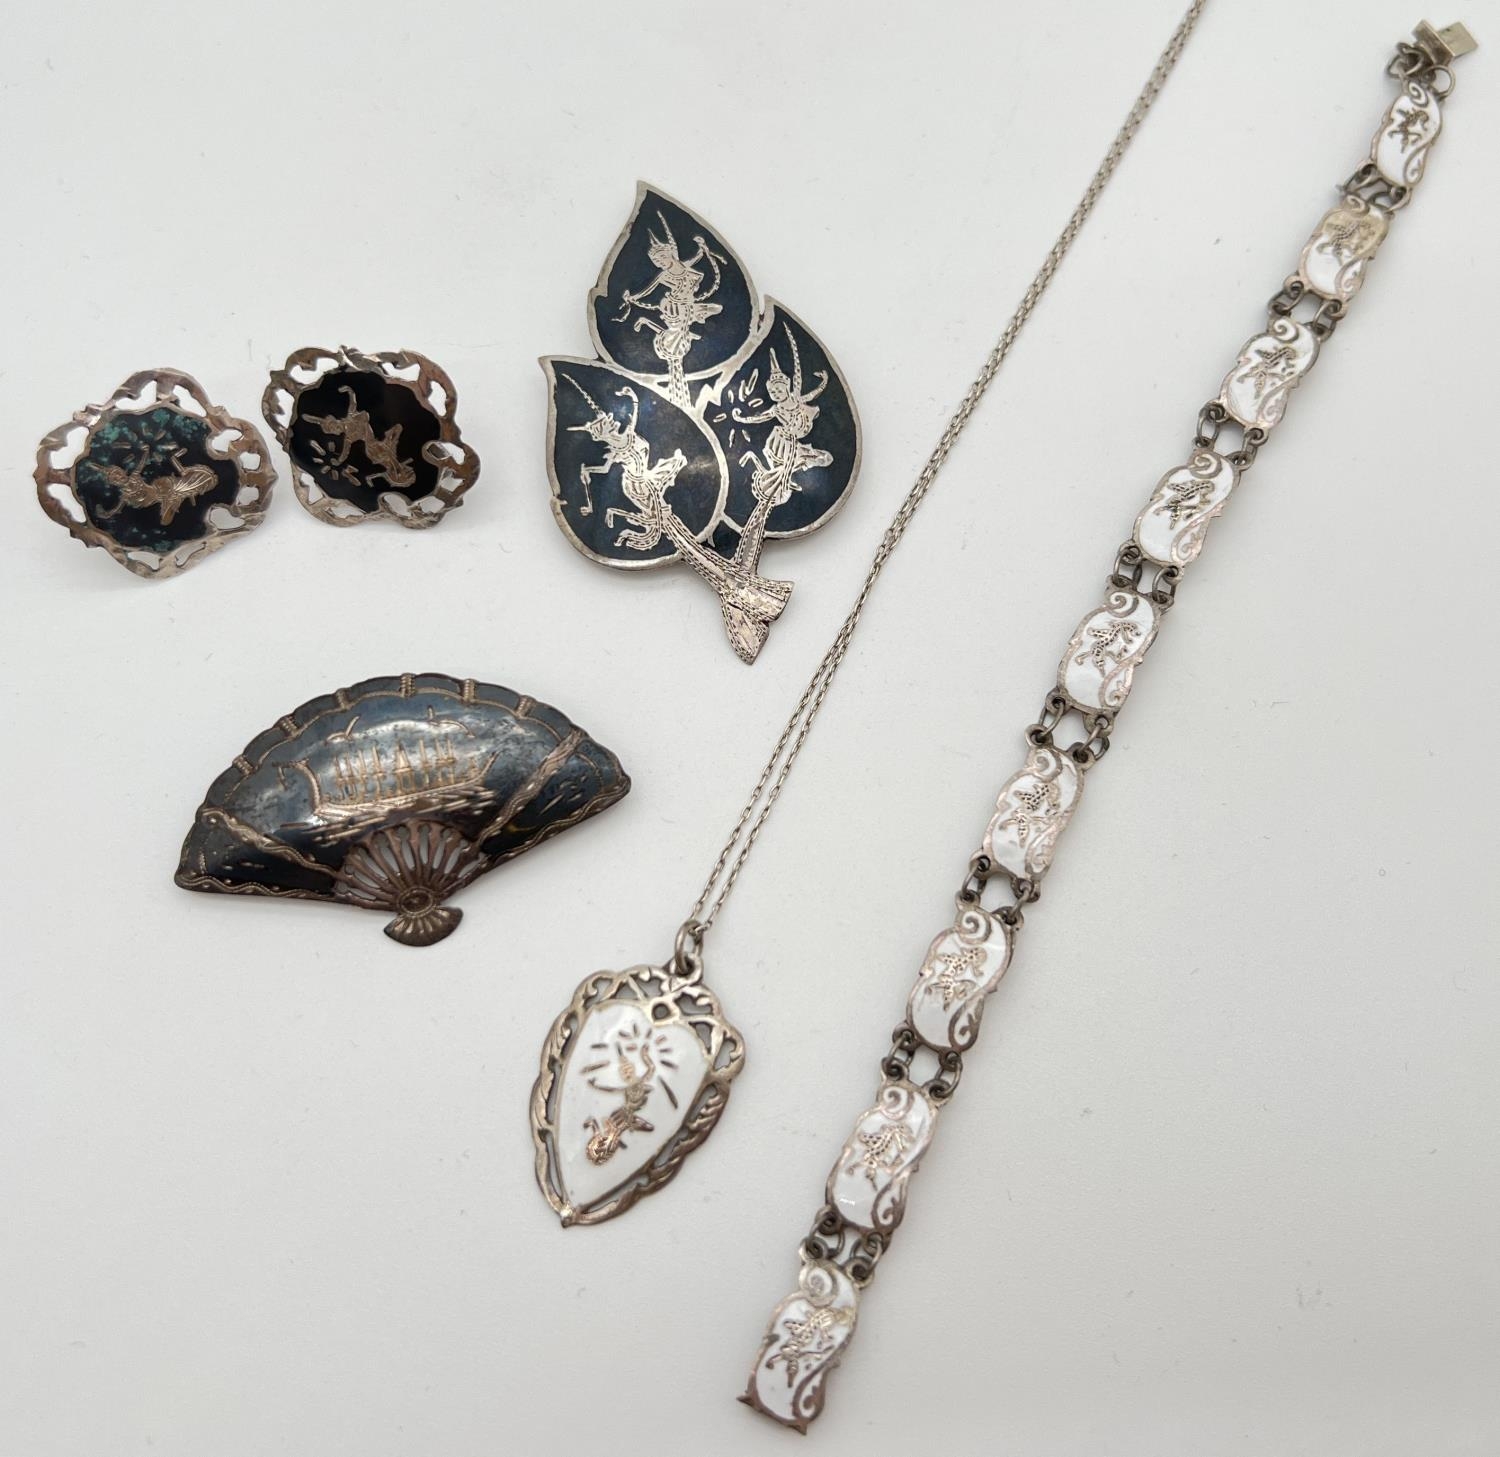 A collection of vintage Siam silver jewellery. A white enamelled pendant on an 18" fine belcher